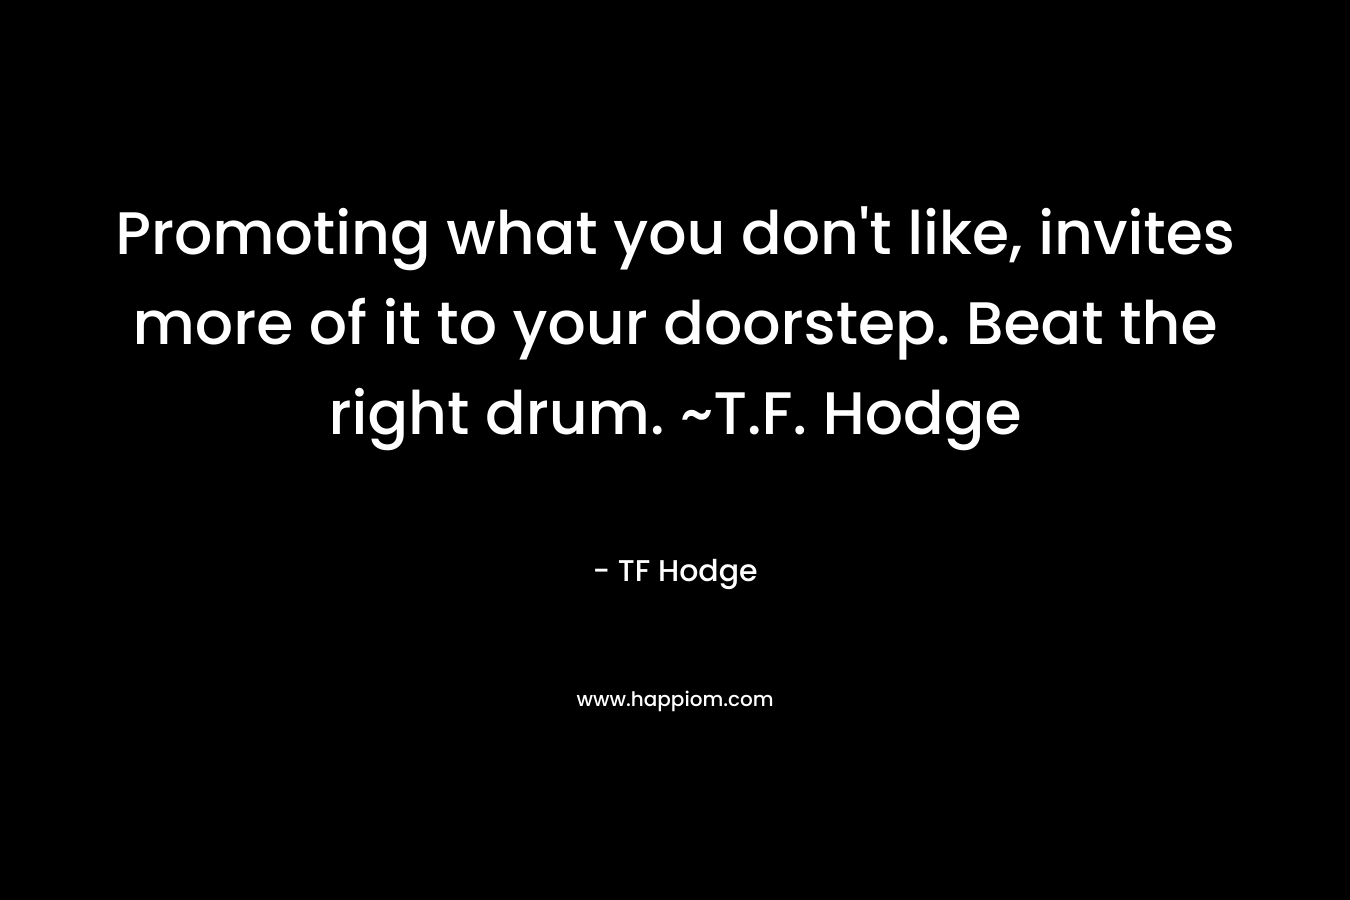 Promoting what you don't like, invites more of it to your doorstep. Beat the right drum. ~T.F. Hodge